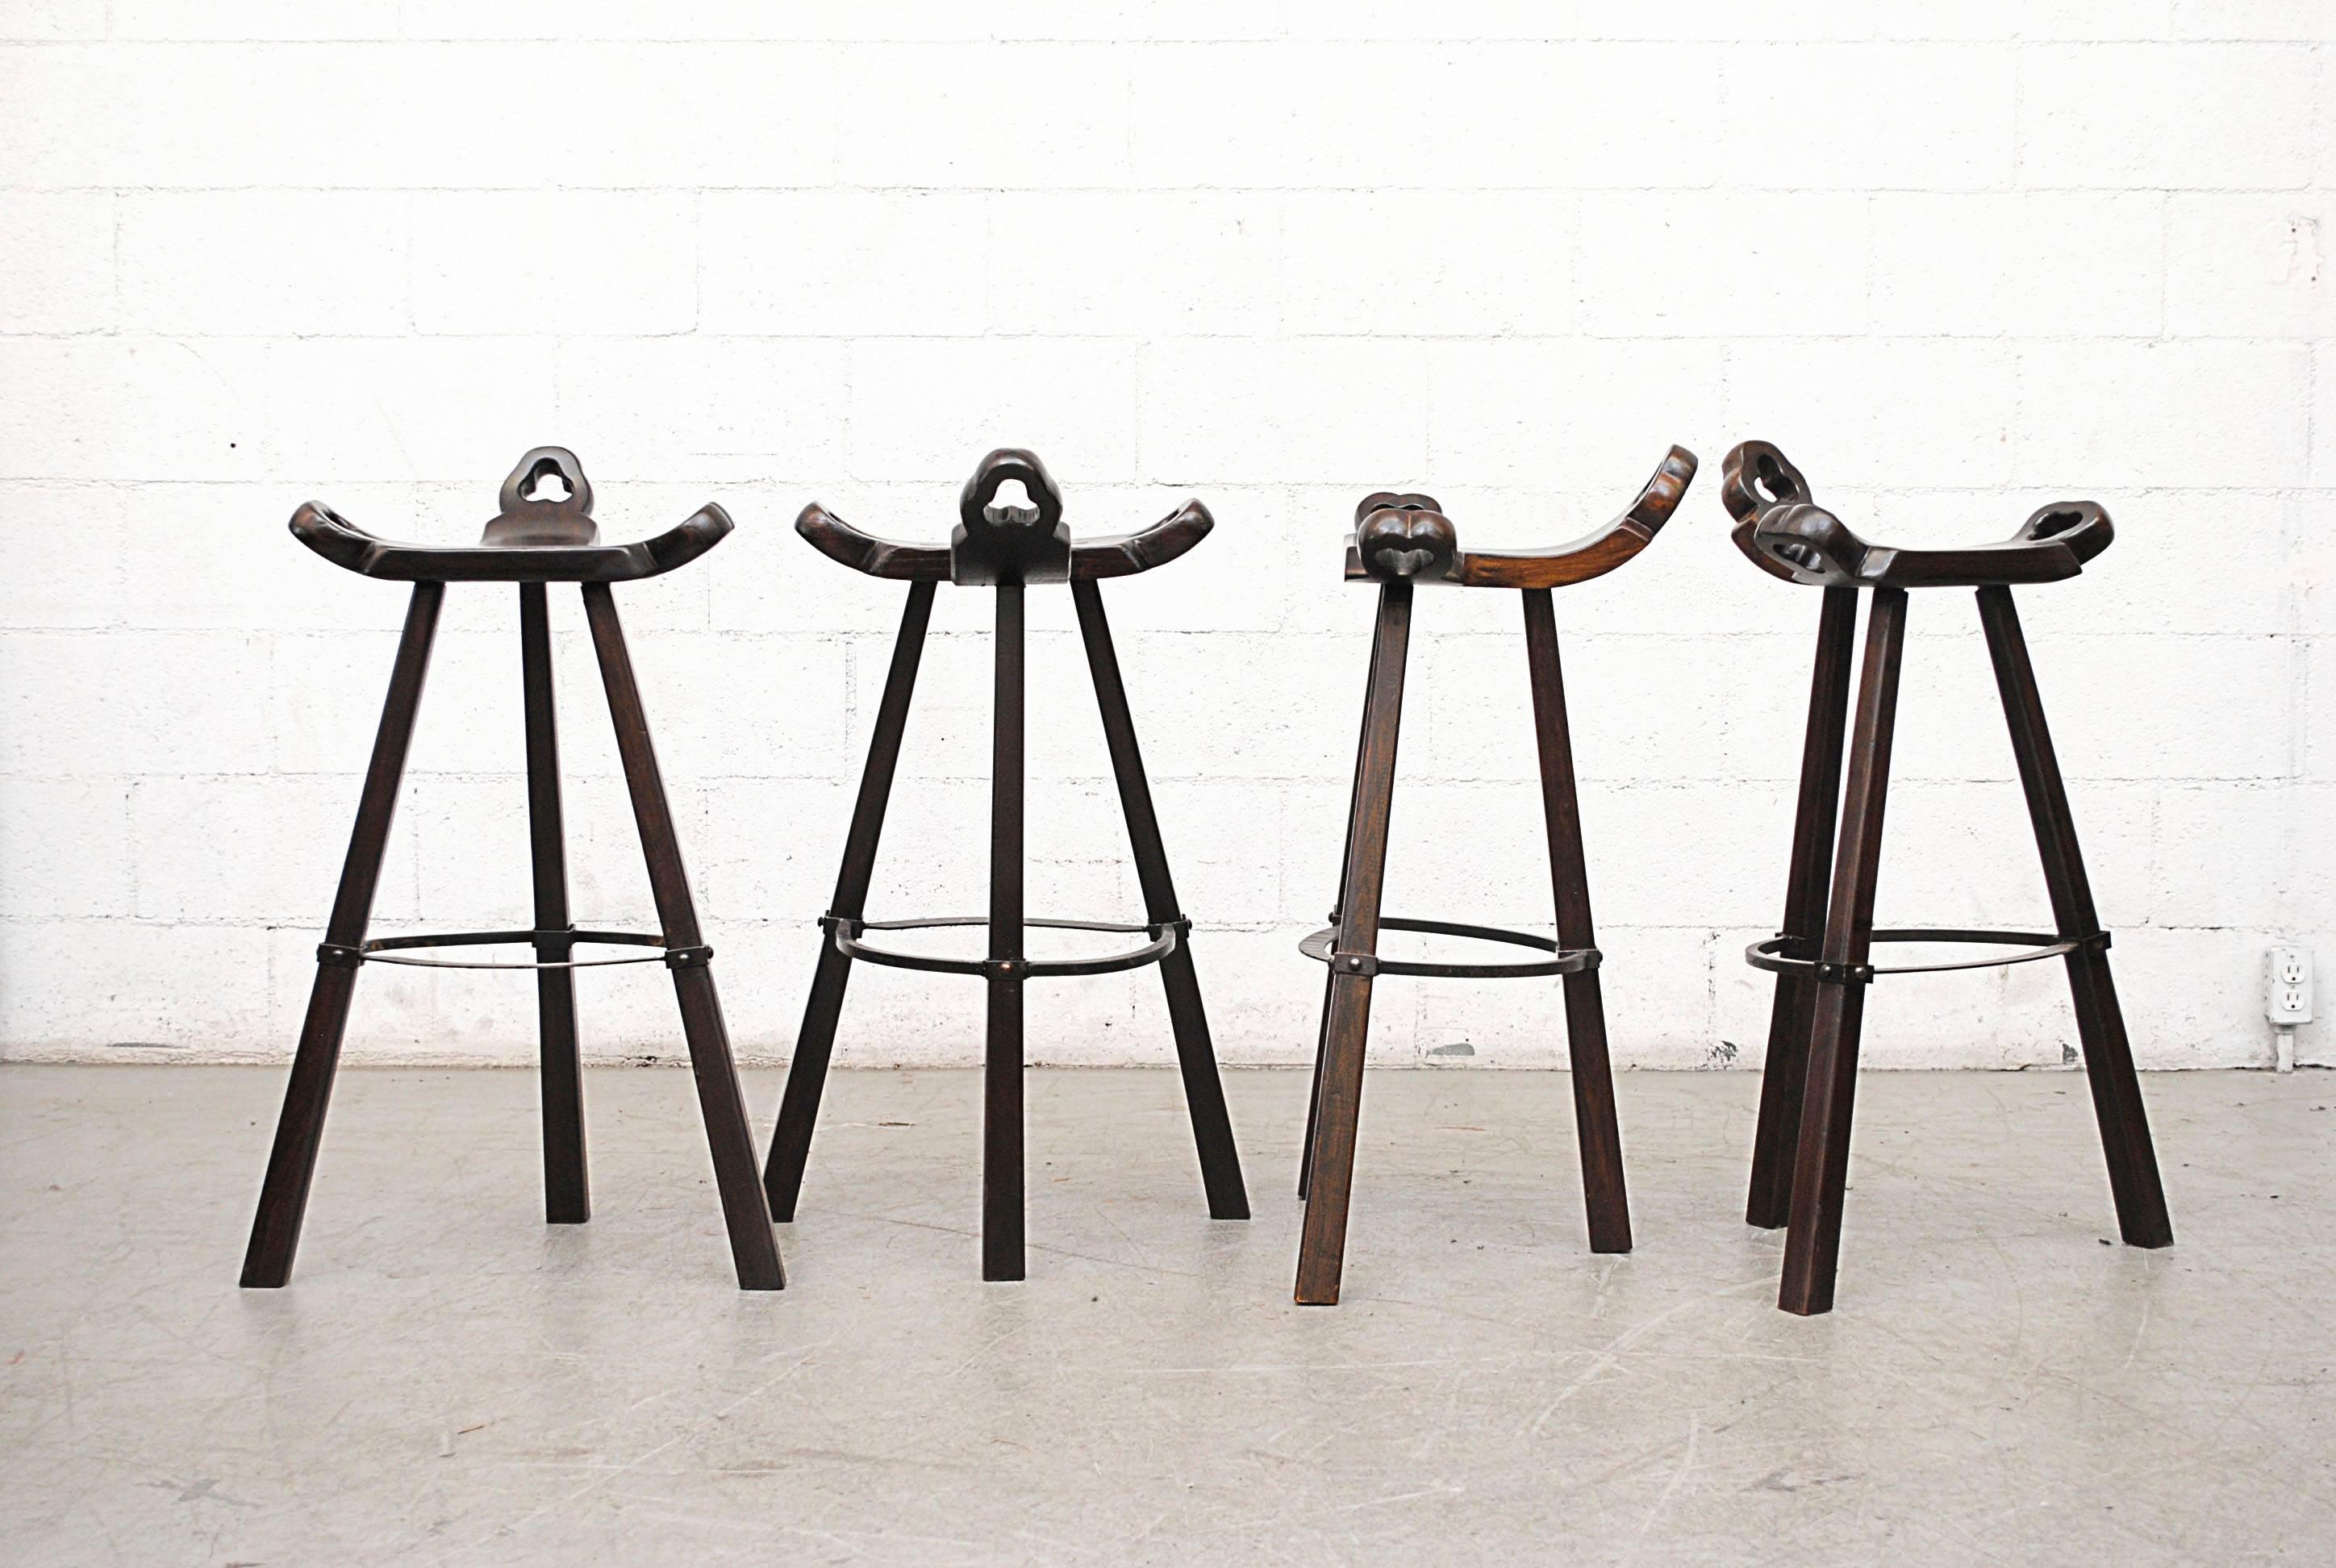 Lightly refinished Brutalist hand-carved dark oak Sergio Rodriguez style Spanish bars stools with black steel patterned footrests. Arabic influence.